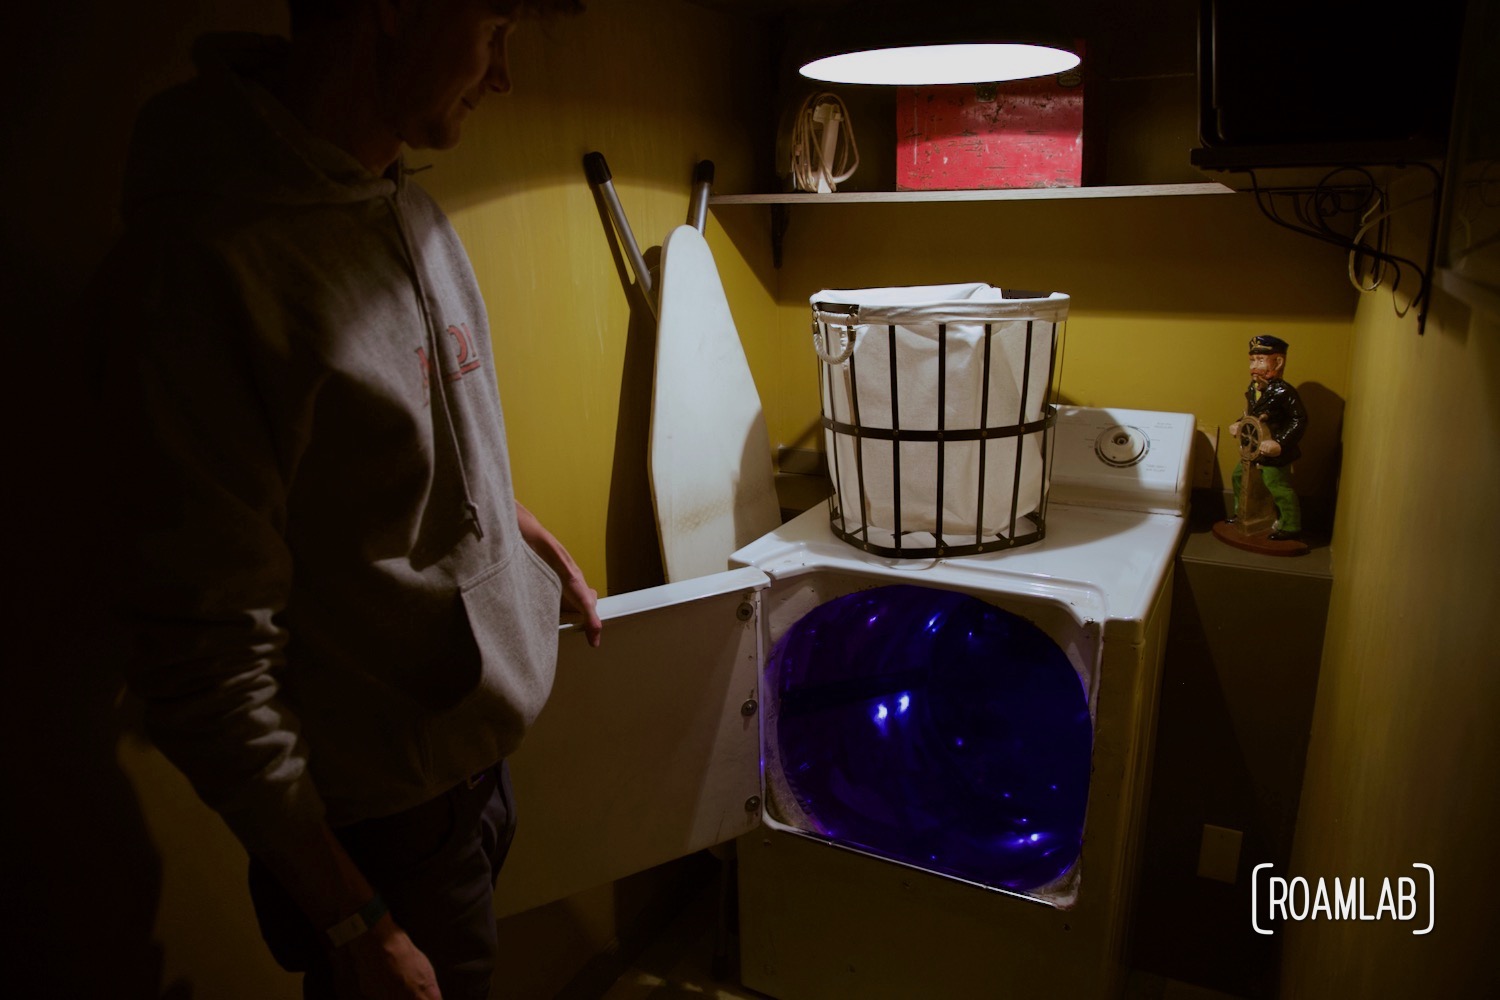 Man looking into an illuminated laundry dryer at the House of Eternal Return, Meow Wolf's Santa Fe, New Mexico Location